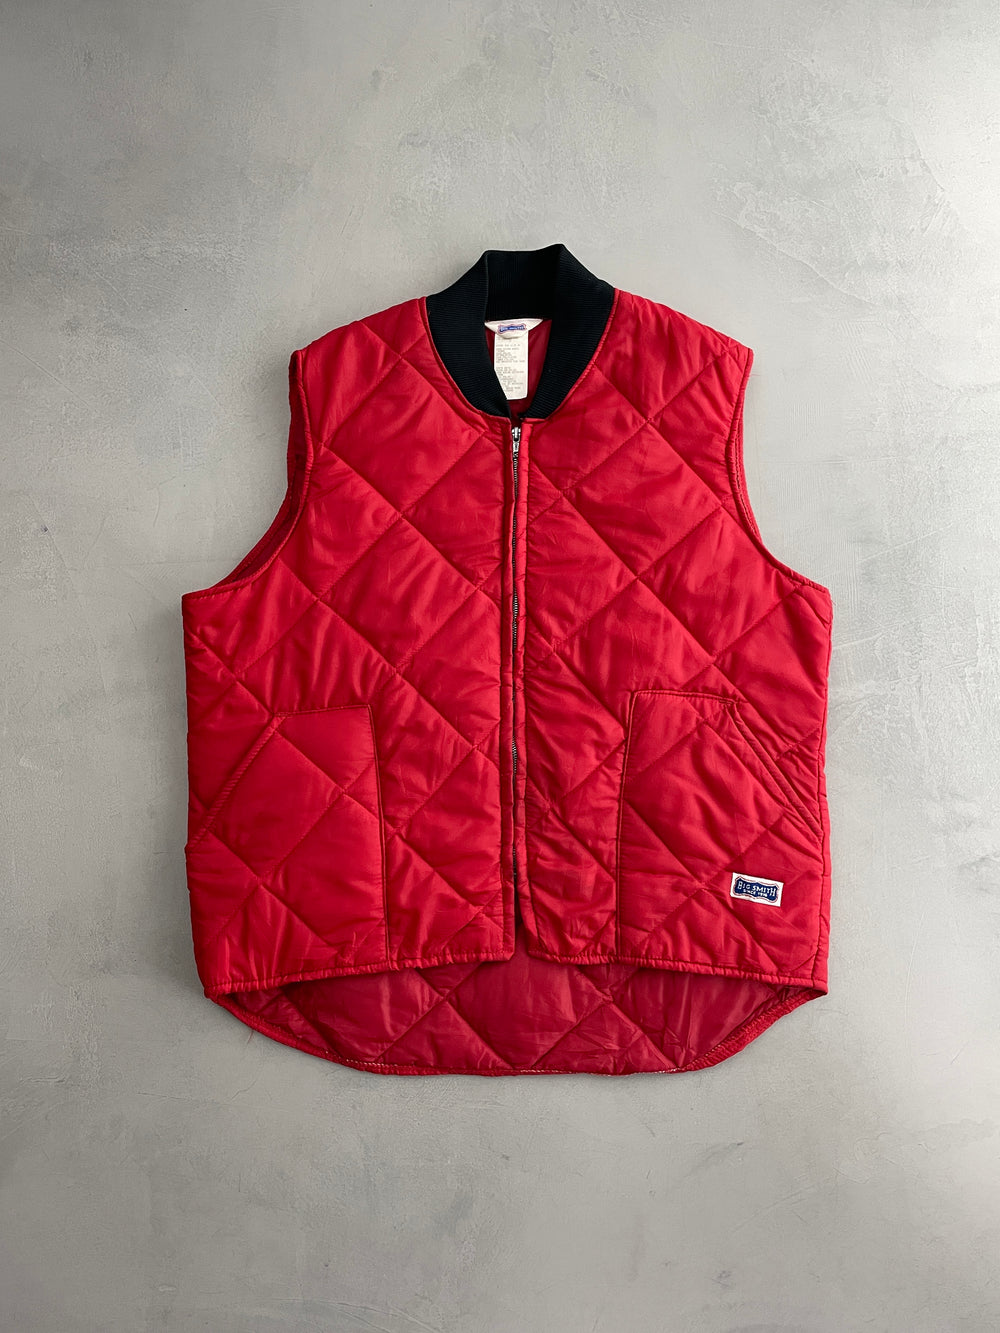 Big Smith Quilted Vest [L]